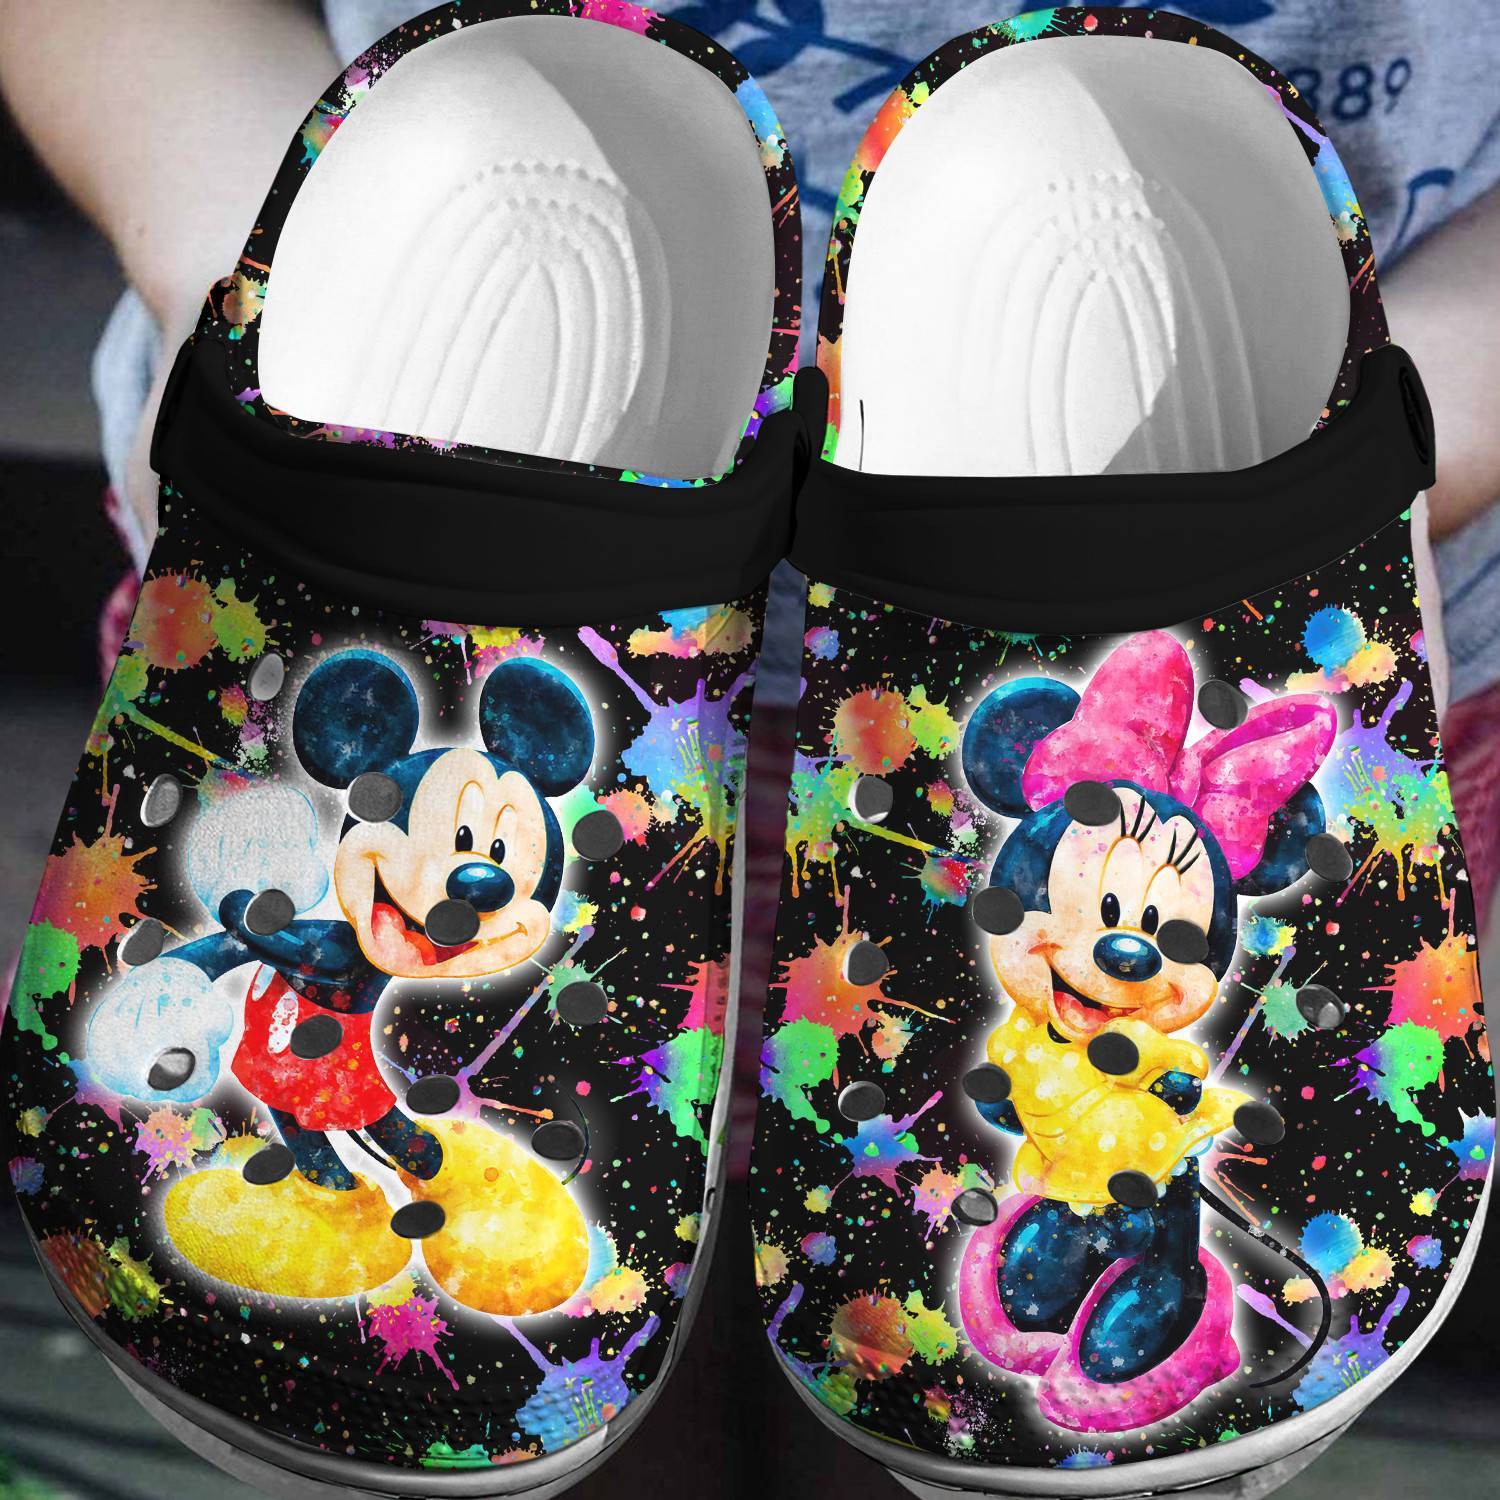 Disney Delight: Mickey Minnie Crocs 3D Clog Shoes – Walk with Mickey and Minnie